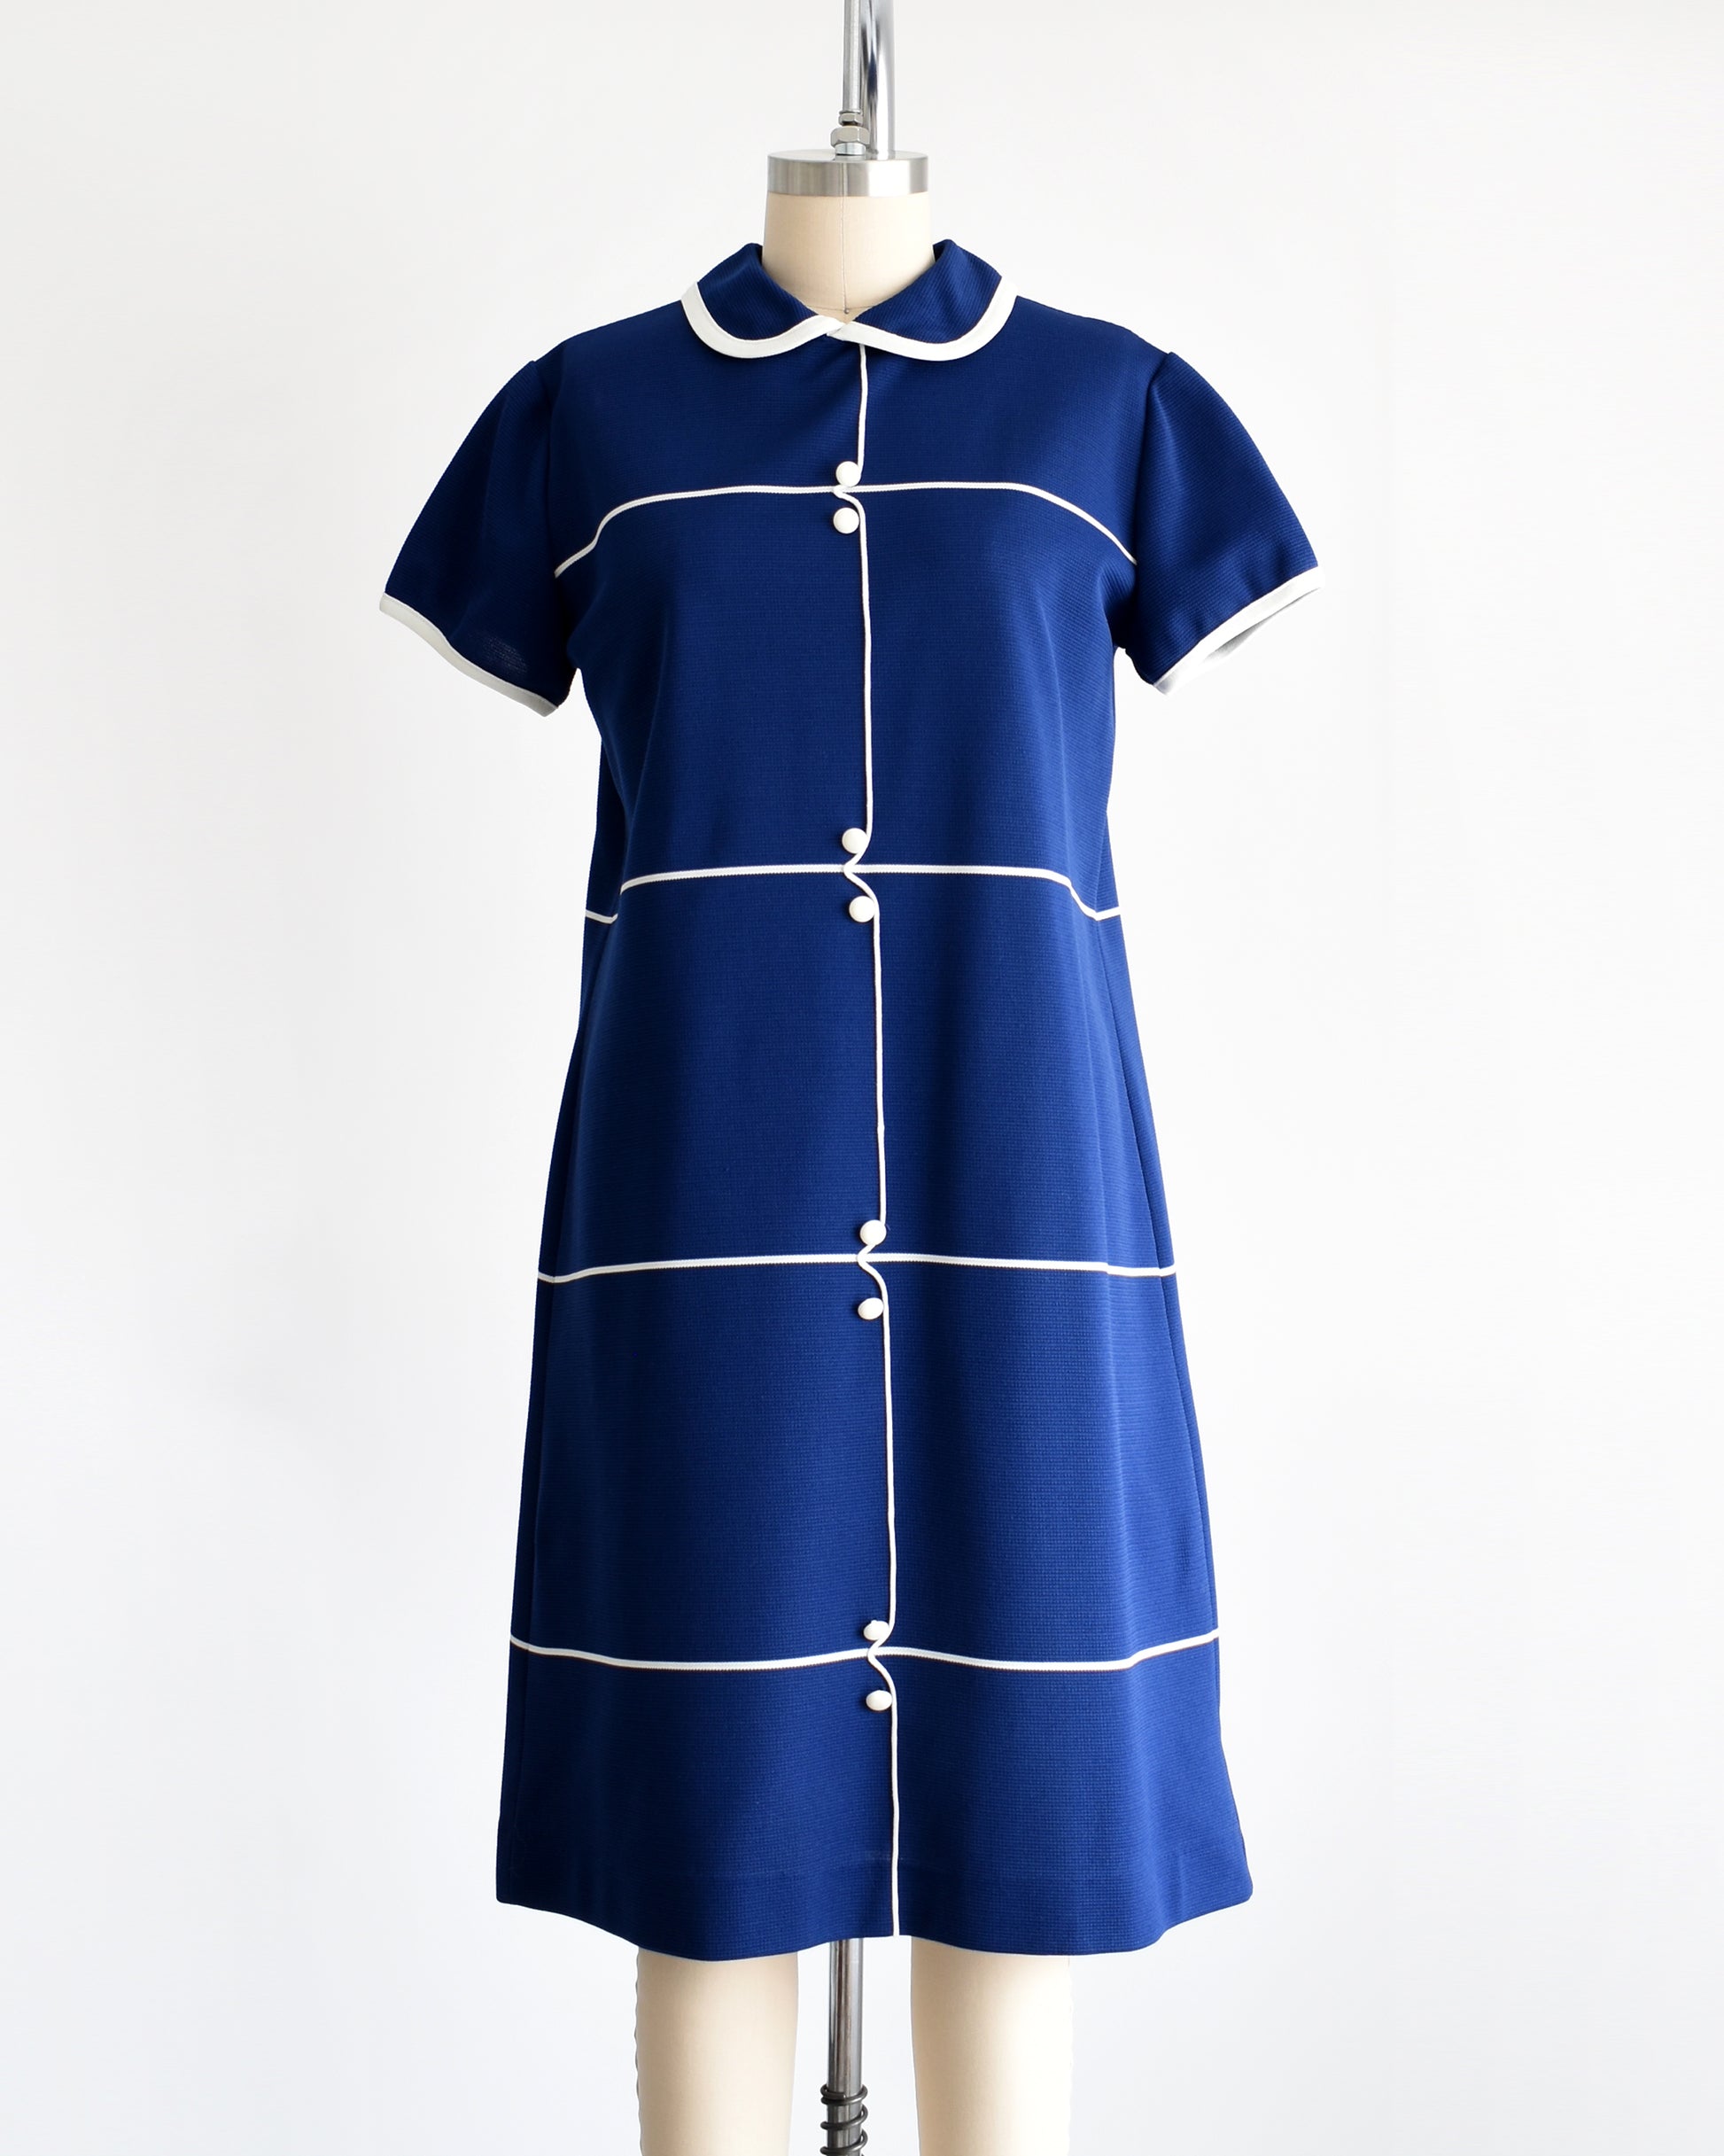 Avintage 1960s navy blue dress with horizontal white stripes, along with a stripe down the front with decorative button accents.